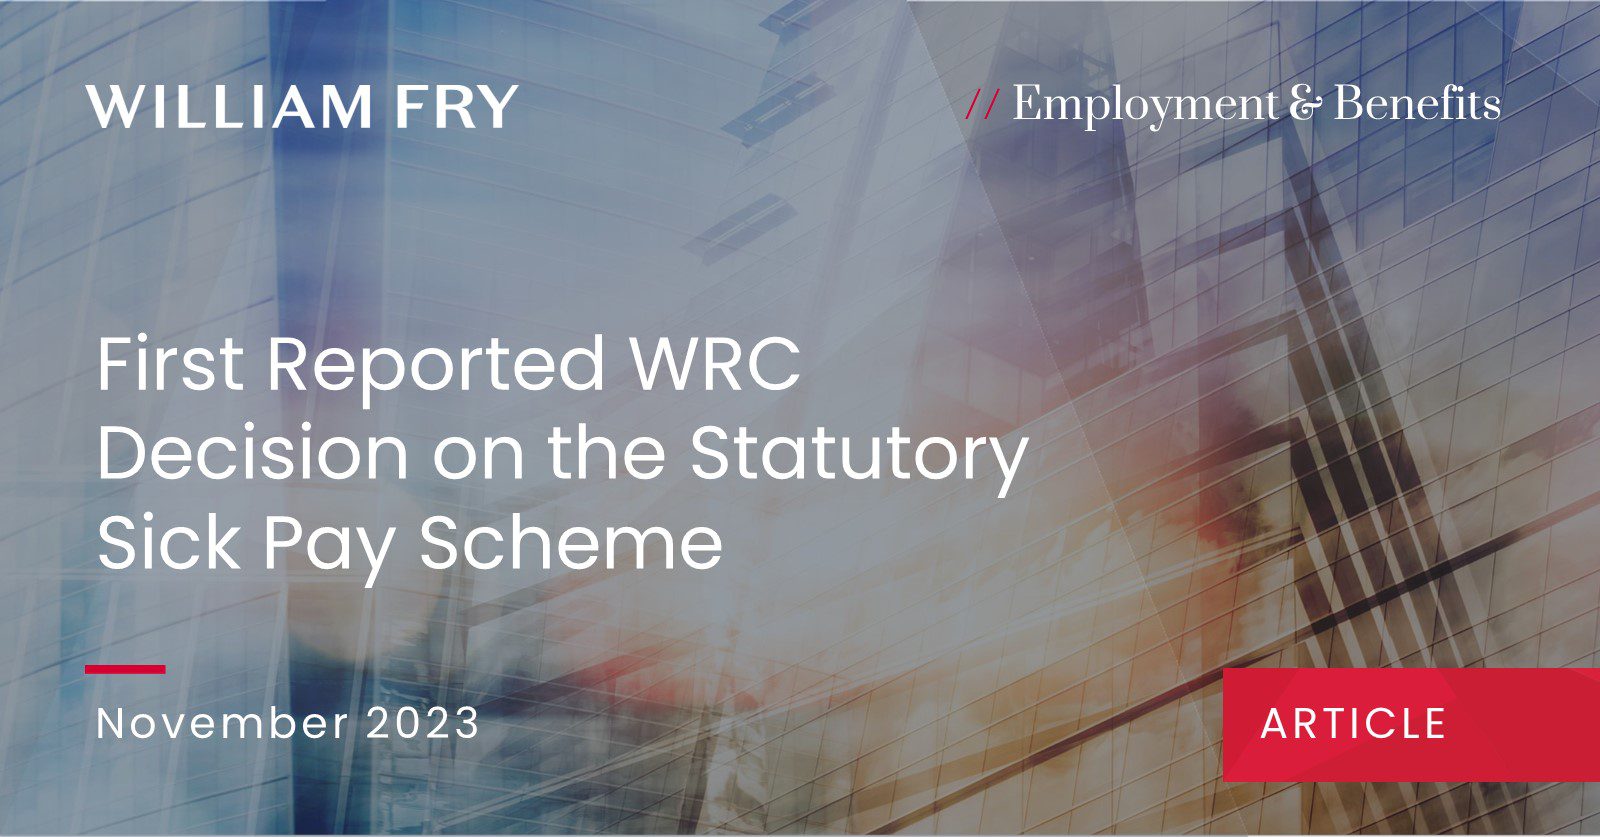 First Reported WRC decision on the Statutory Sick Pay Scheme